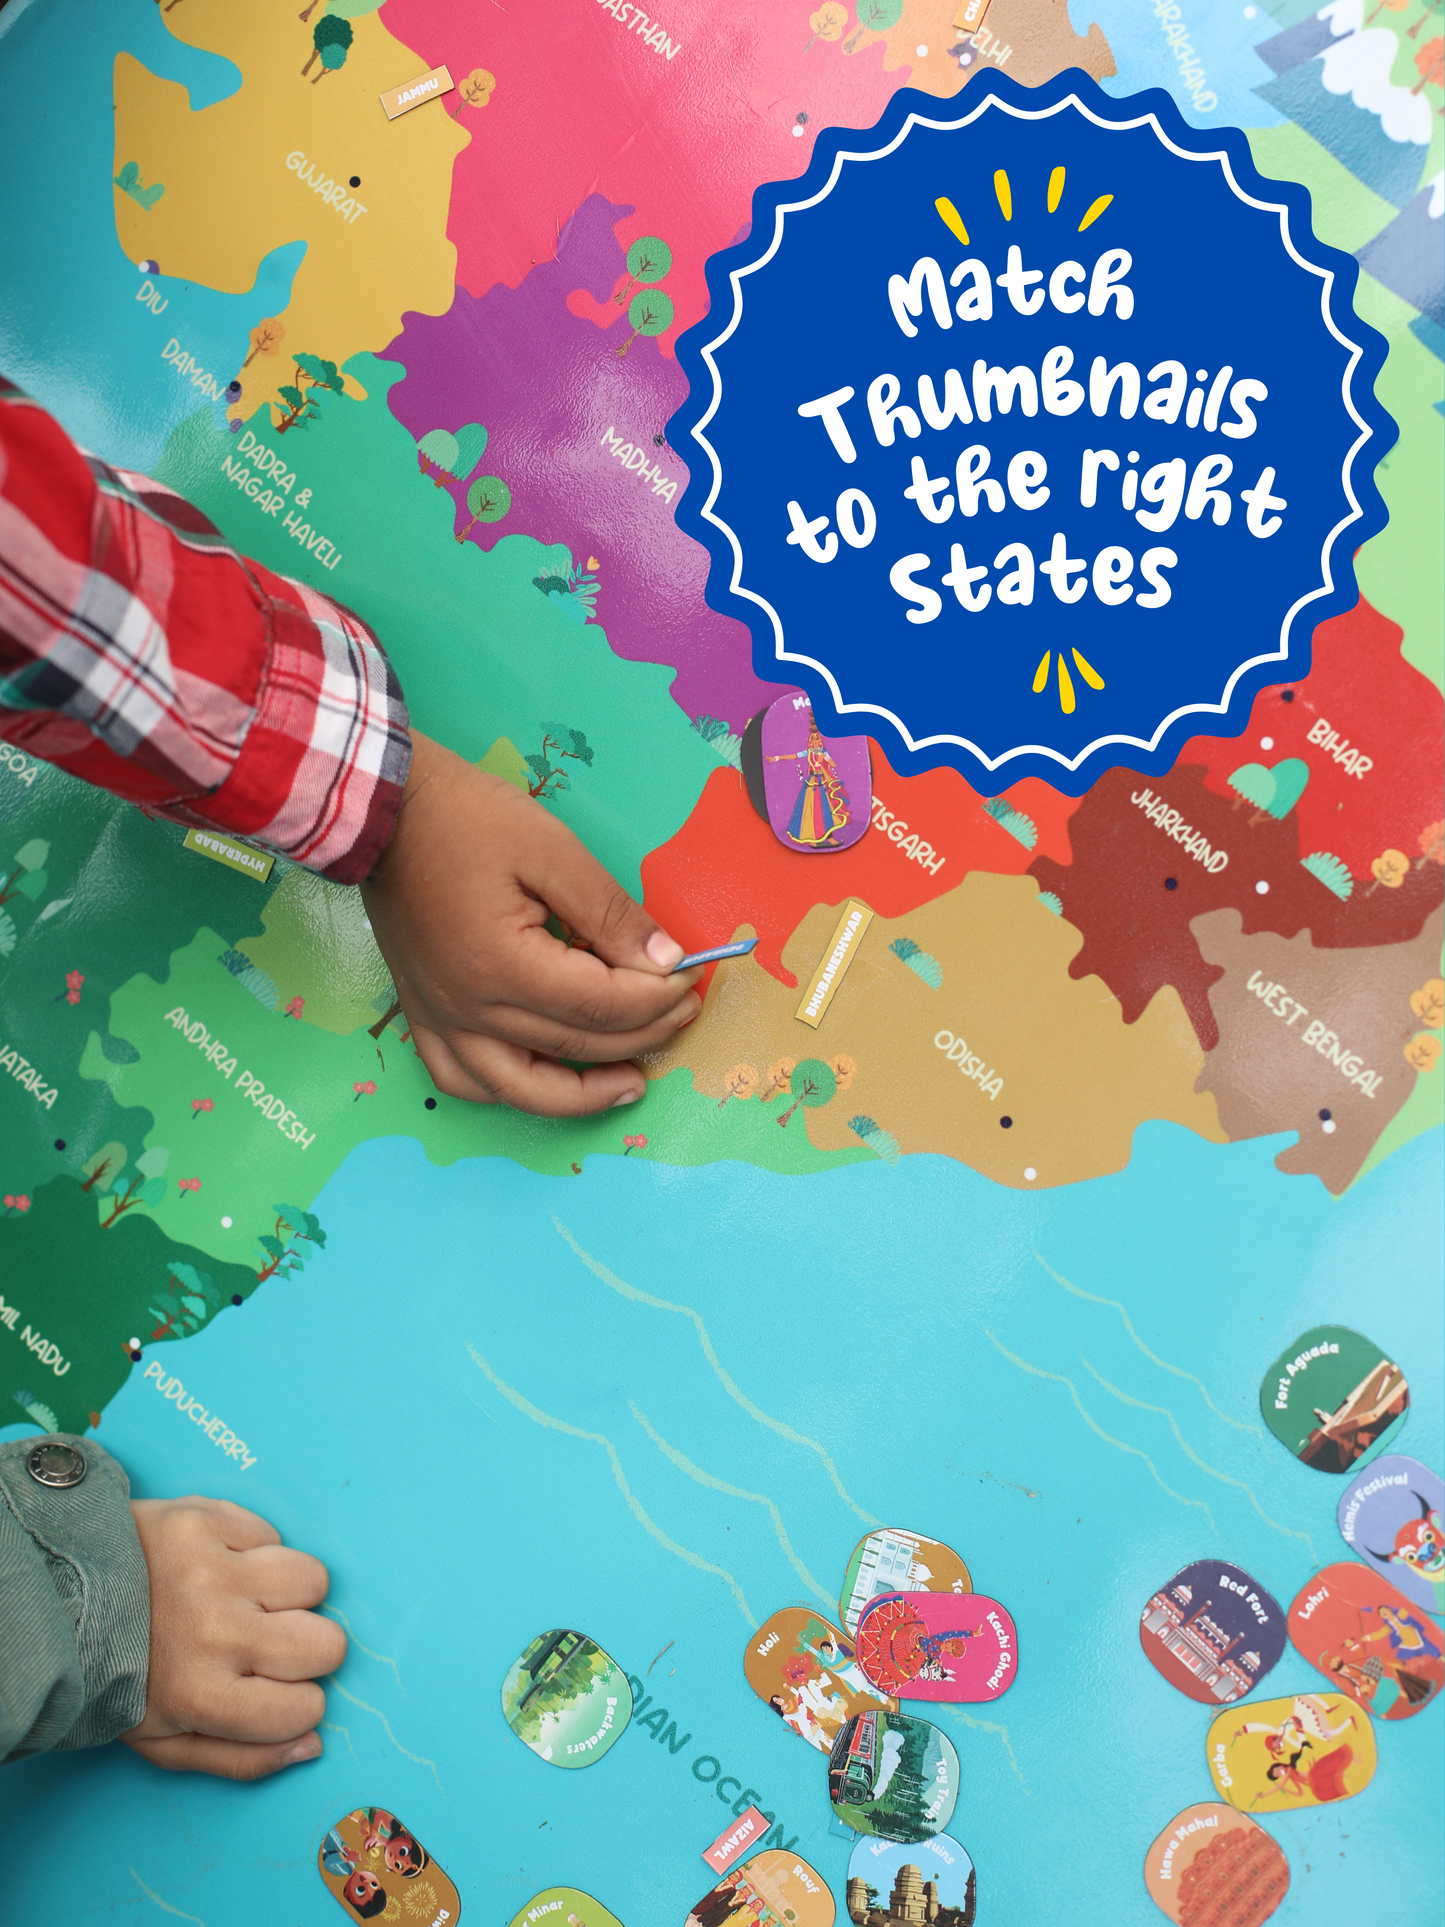 Toynama Interactive India Map for Kids - Wall Mountable Map with Capitals and Foods Magnetic Tiles Ages 5 and Up